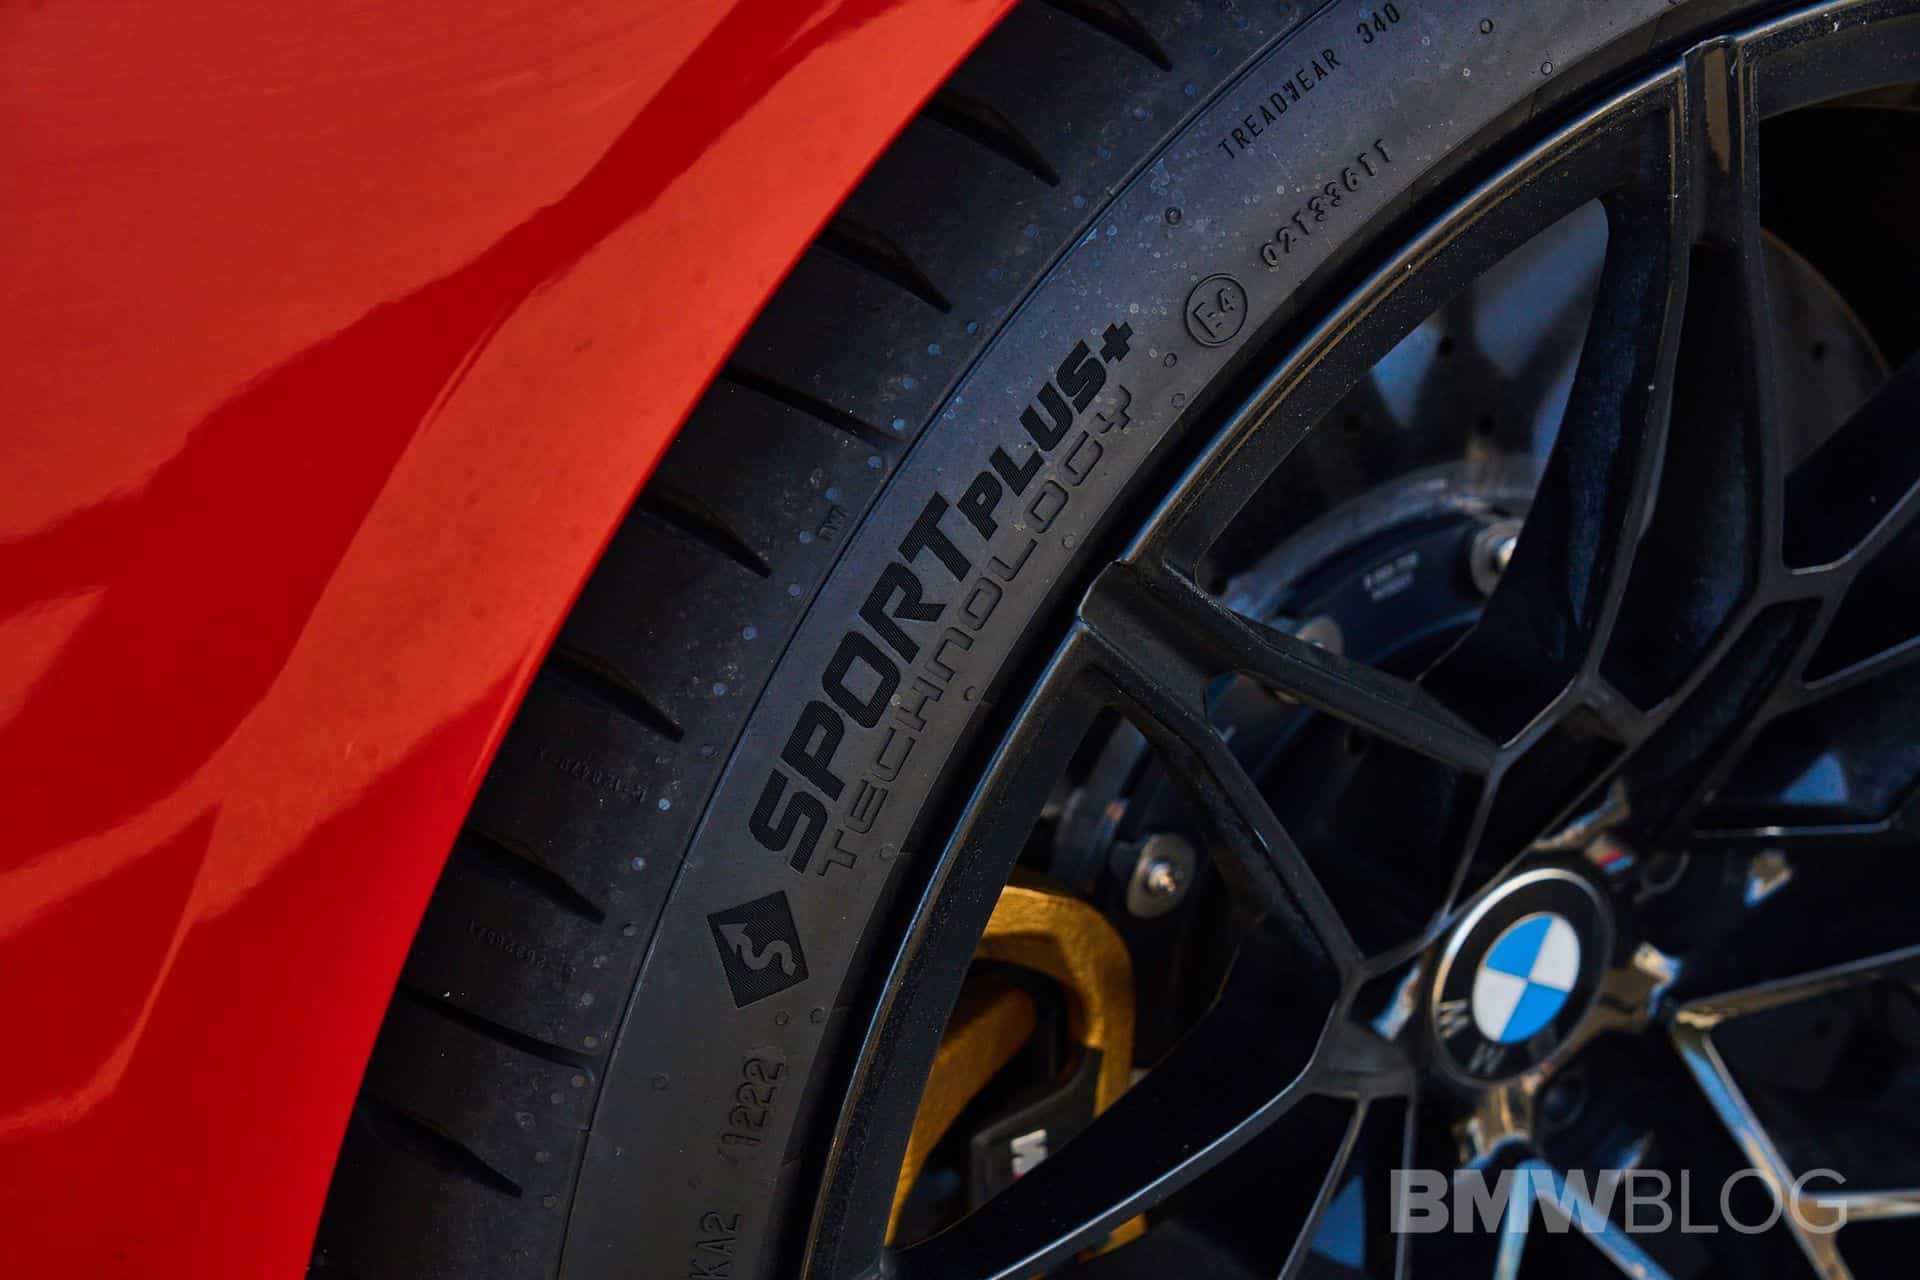 Looking to Buy New Tires This Year. 7 Must-Know Facts About Continental ExtremeContact DWS 06 Plus Tires